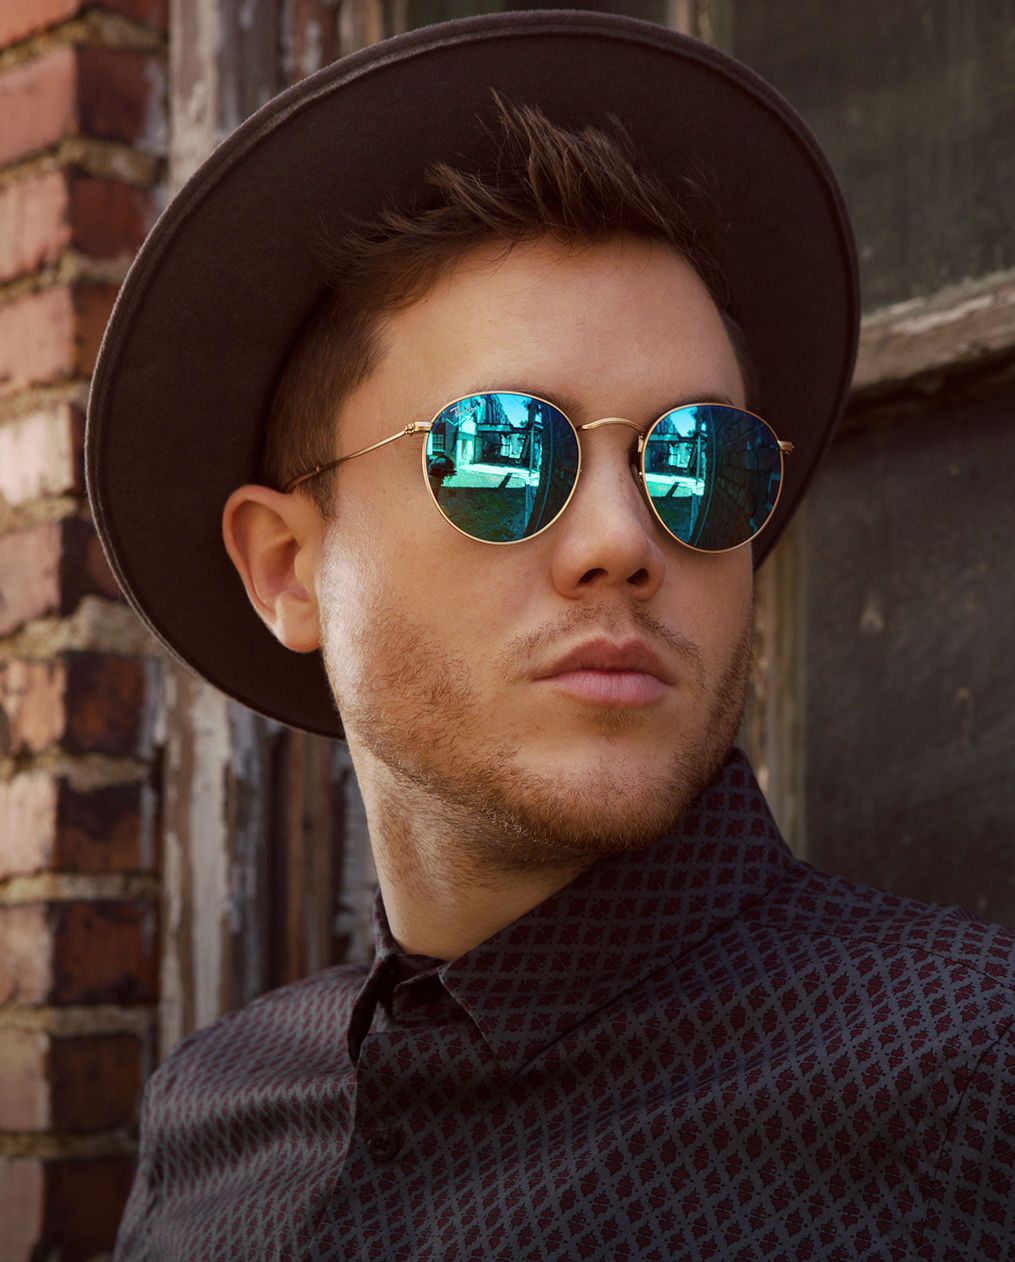 Trent Harmon wearing a fedora and sunglasses